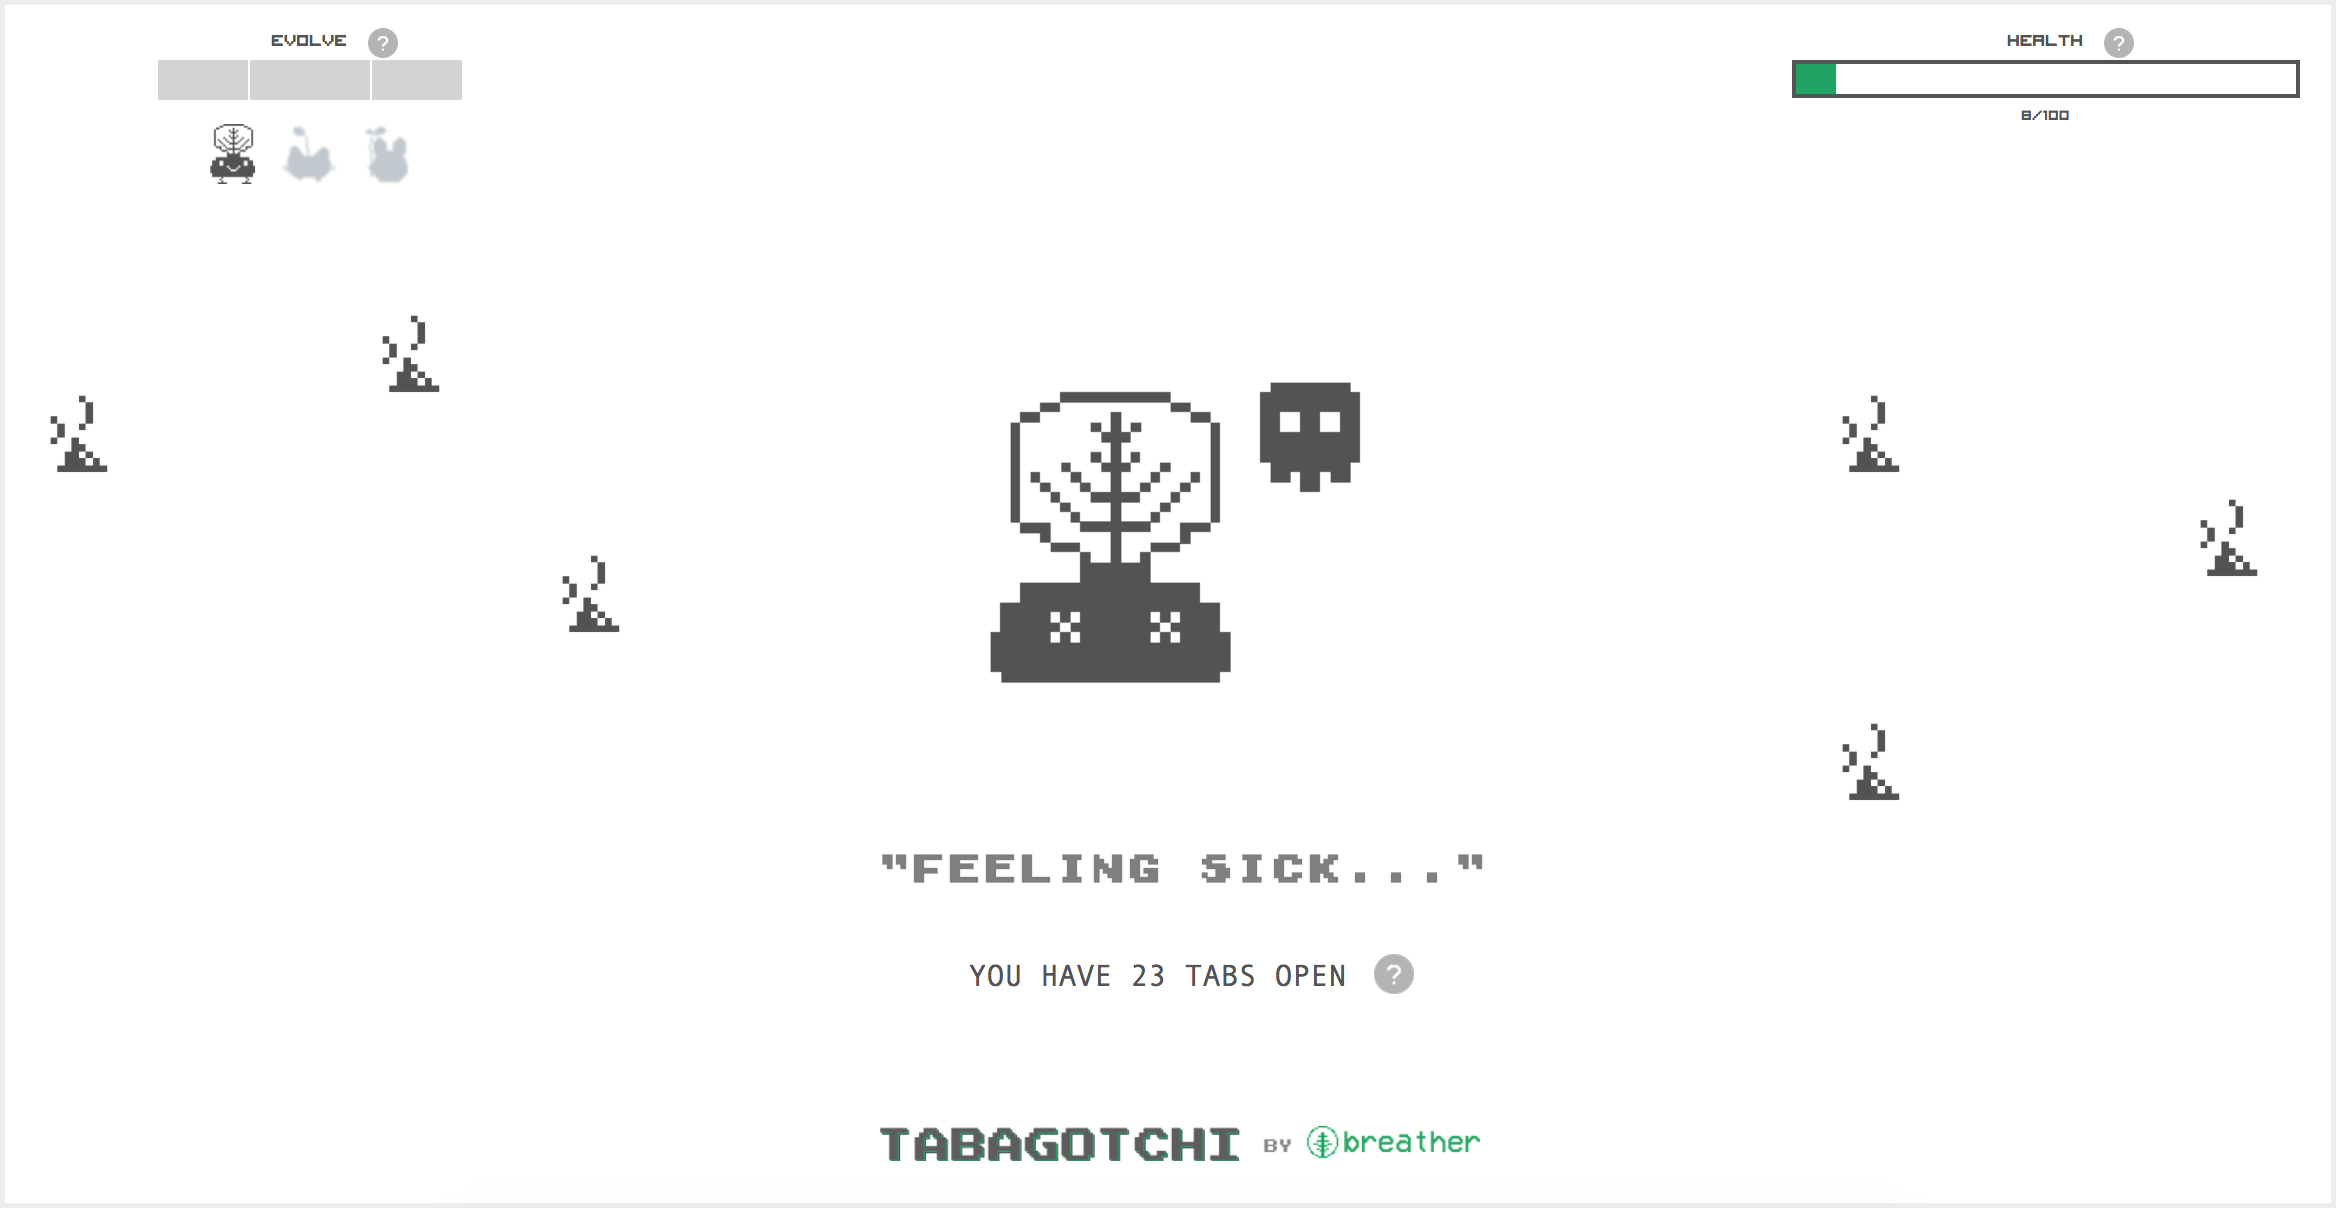 Declutter Your Chrome Browser Tabs Or This Tamagotchi Clone Will Die